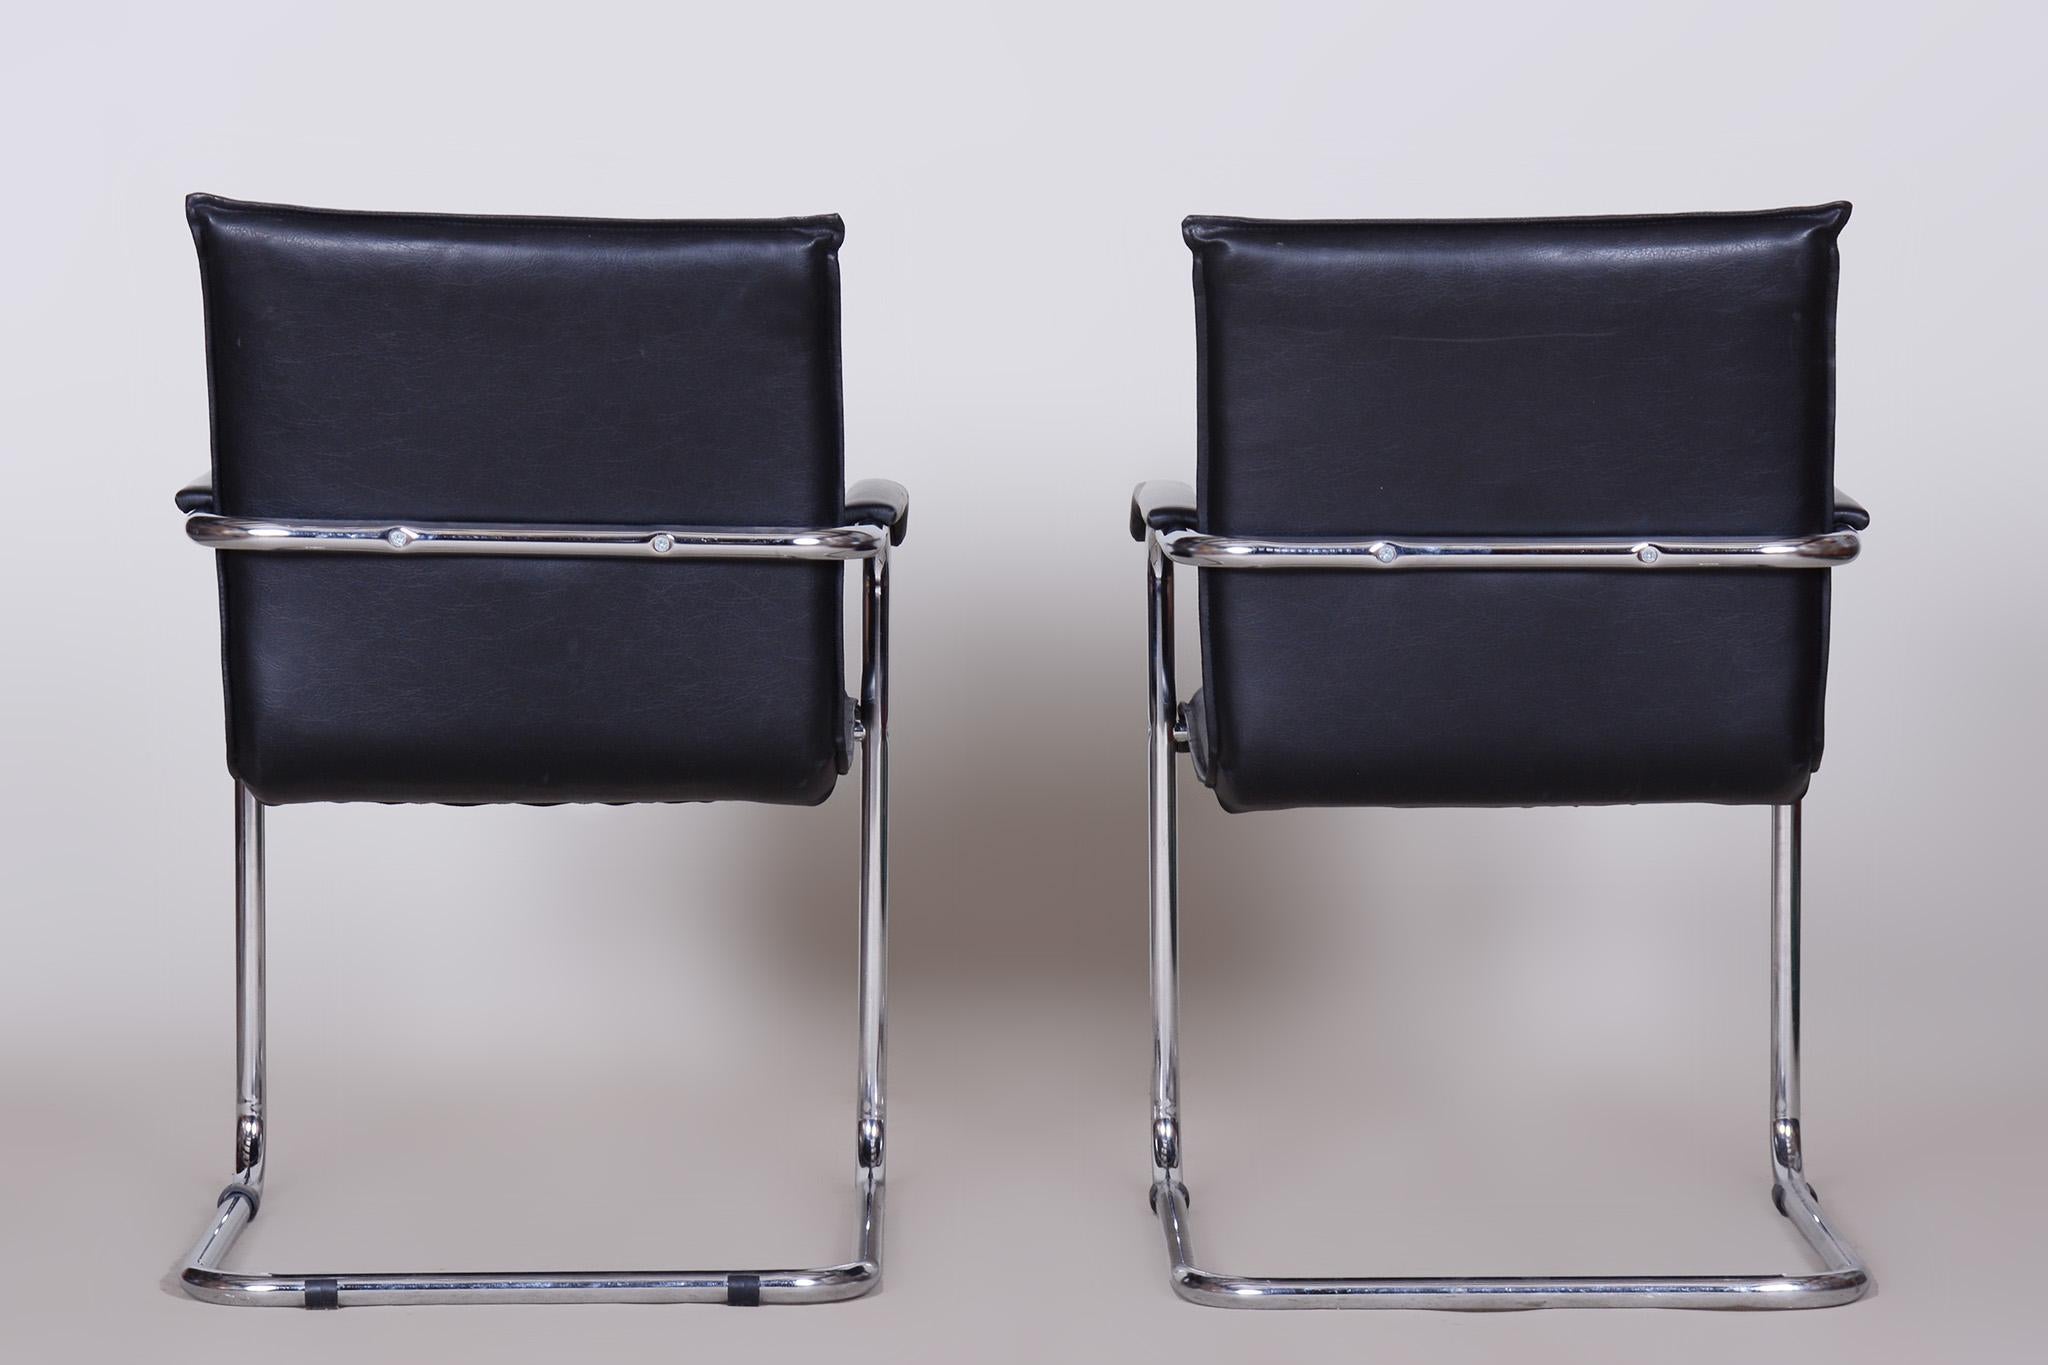 Steel Pair of Black Bauhaus Chairs, Artificial Leather, 1970s, Germany For Sale